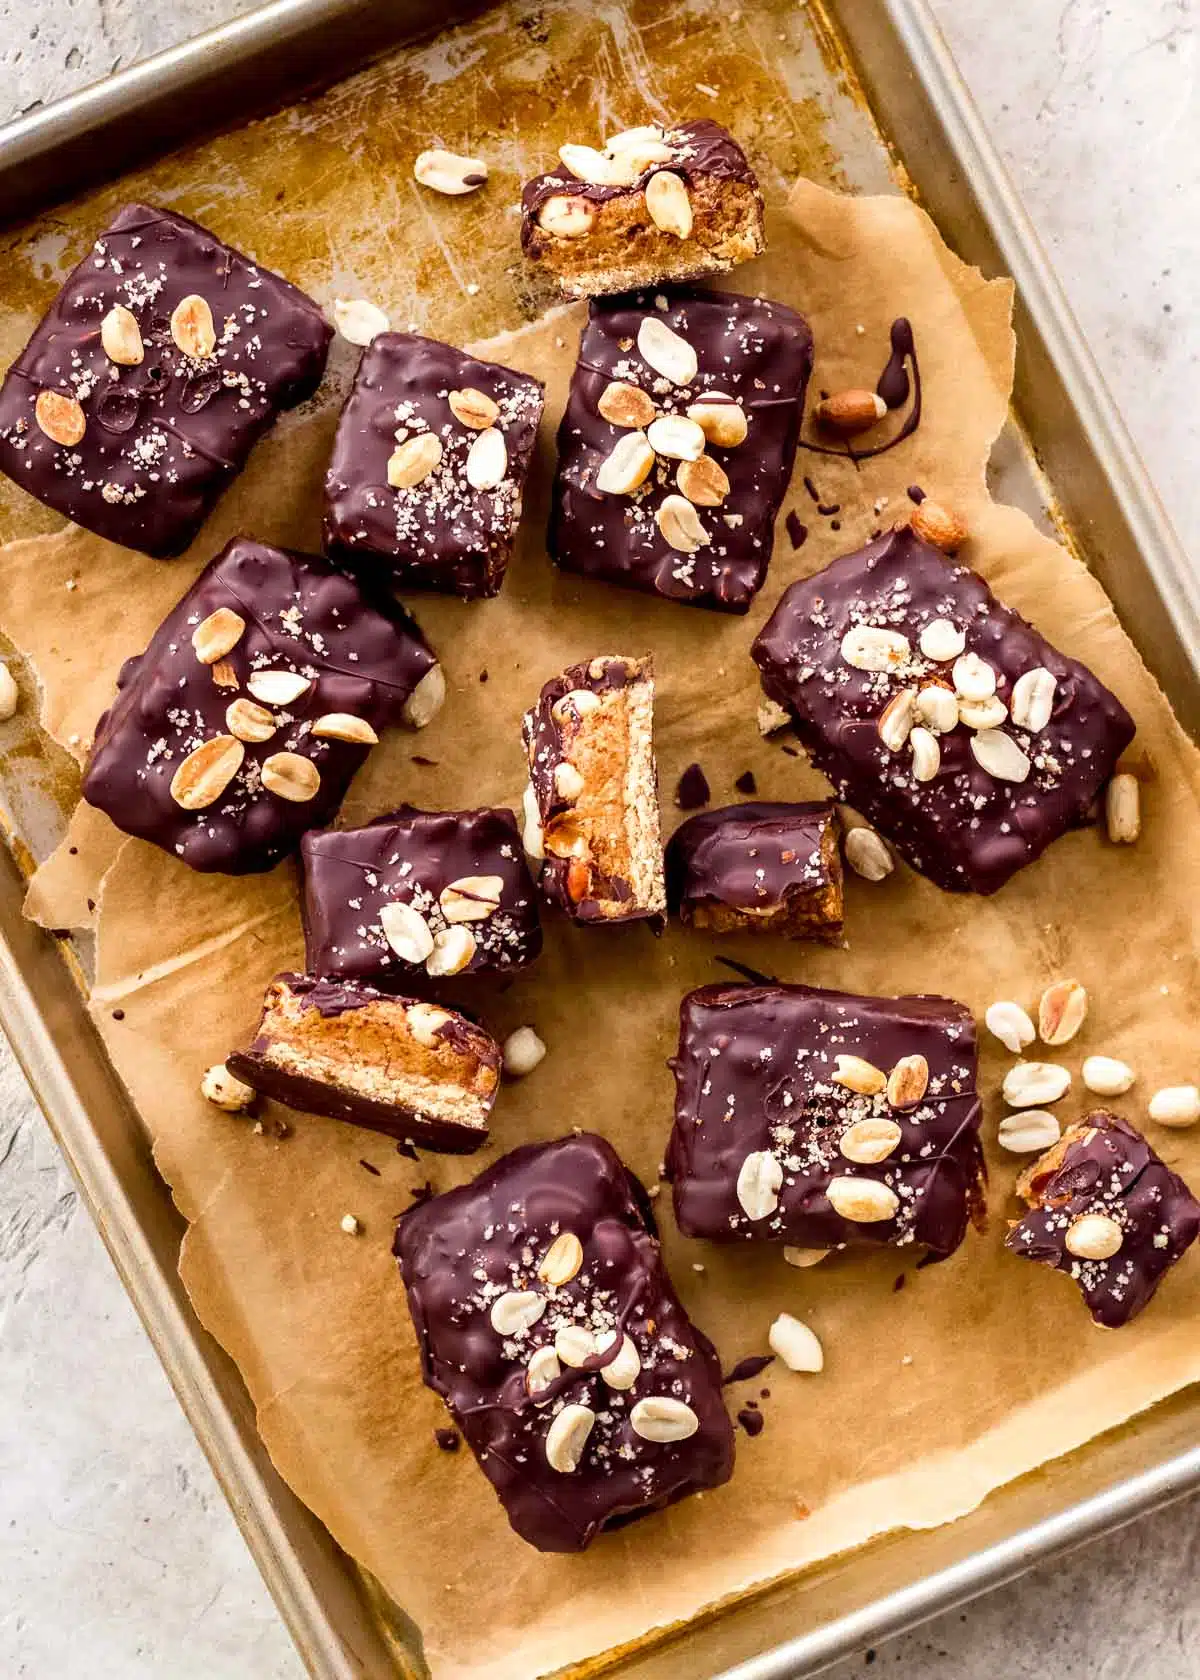 A parchment-lined baking sheet is scattered with vegan snickers bars, which are covered in dark chocolate and decorated with peanuts.